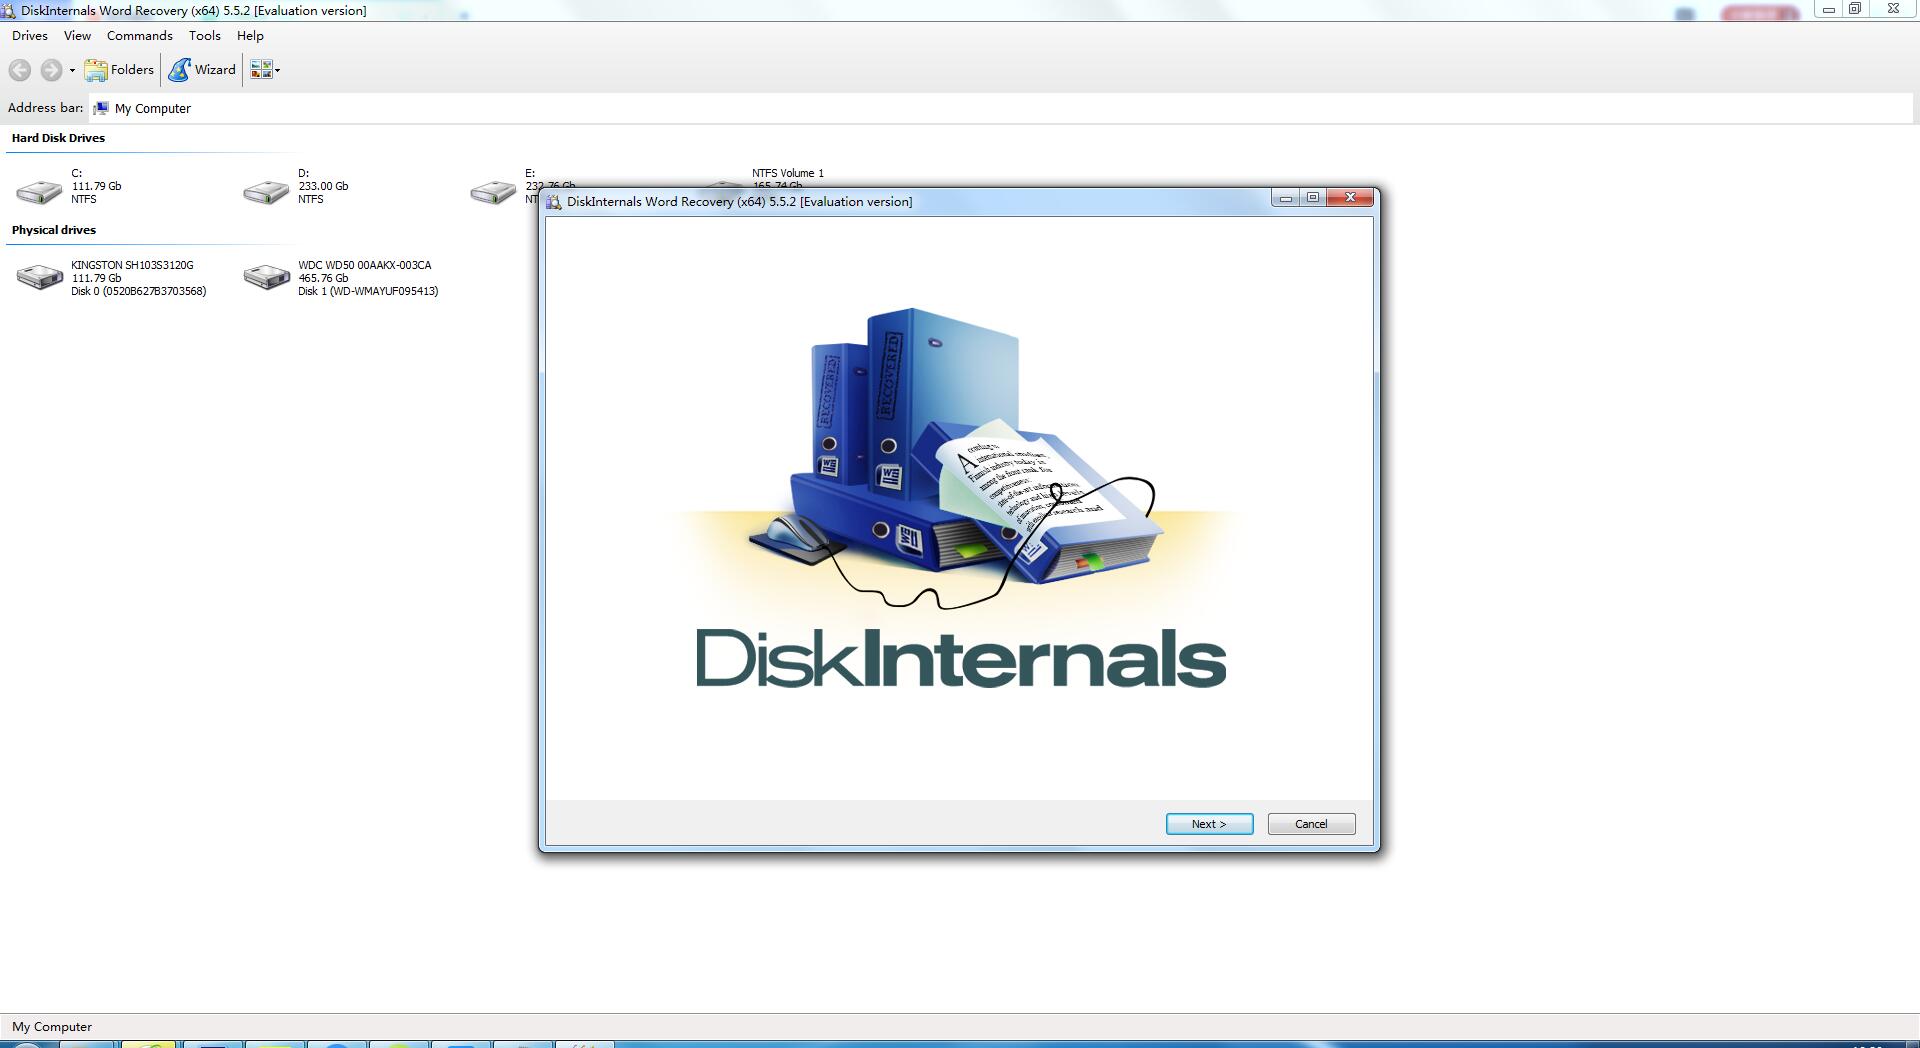 DiskInternals Word Recovery